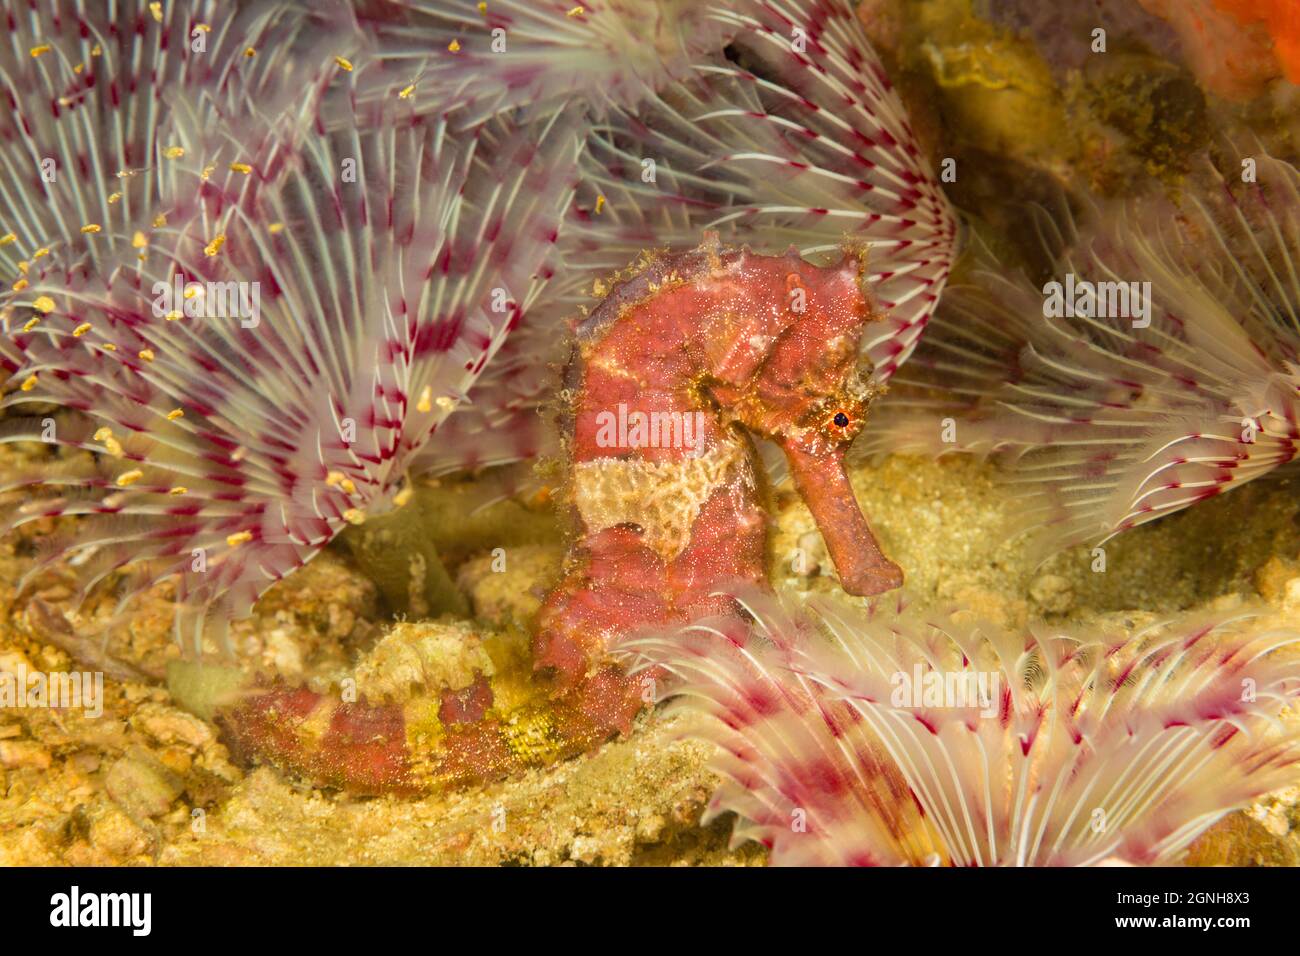 This hedgehog seahorse, Hippocampus spinossimus, is in the middle of a forest of feather duster worms, Philippines. The tiny dots schooling in the cor Stock Photo